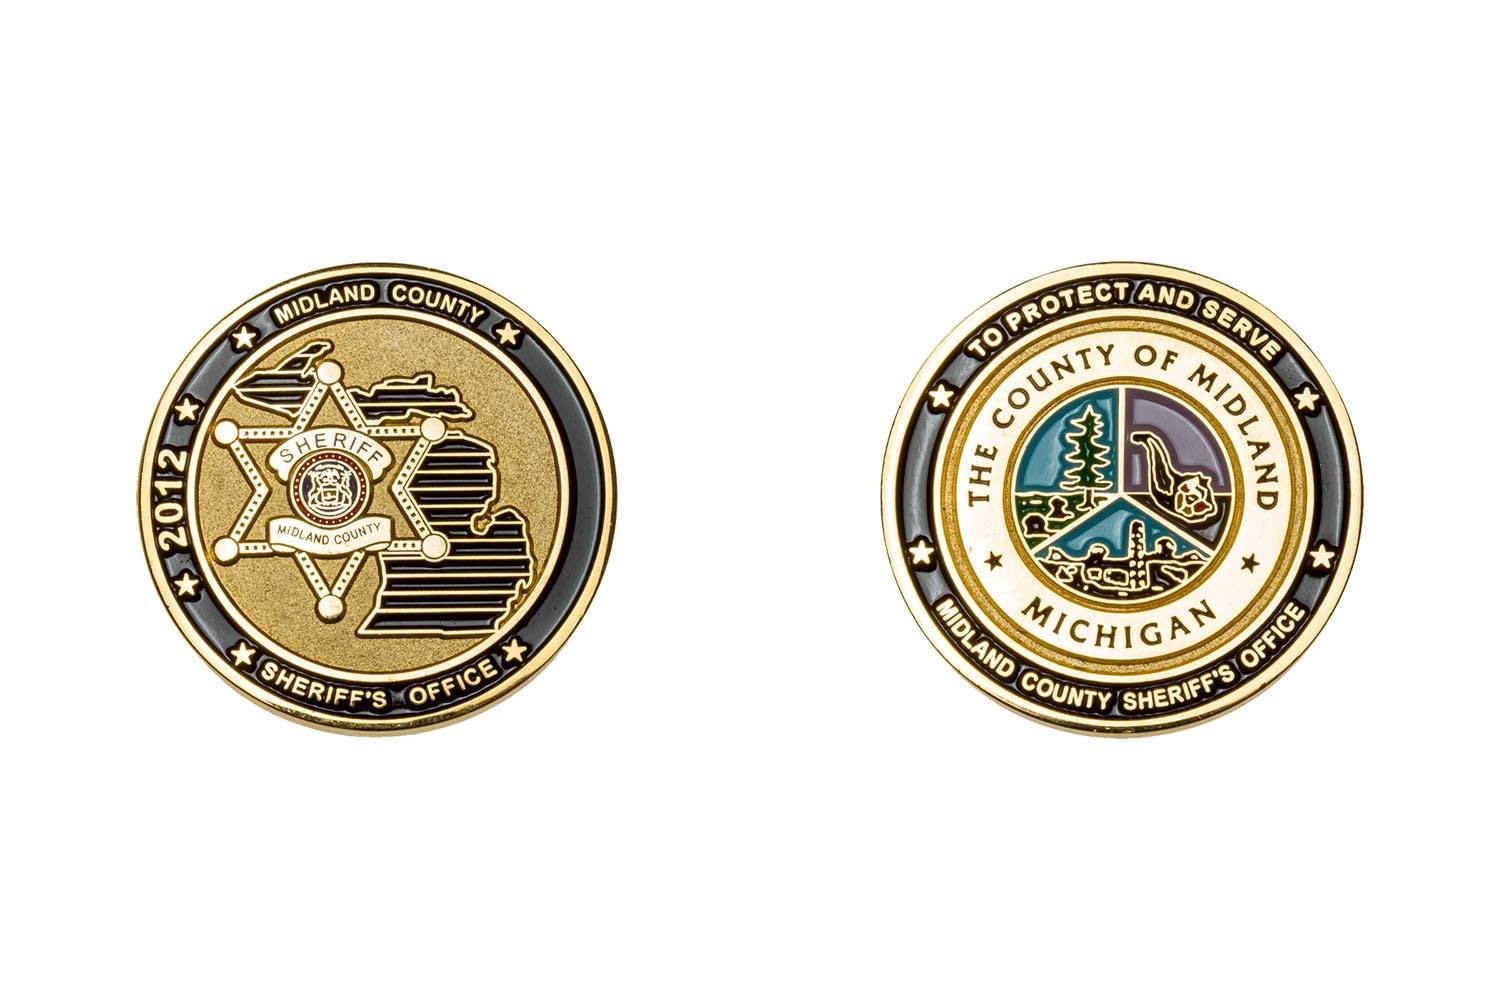 Metal sheriff's coins